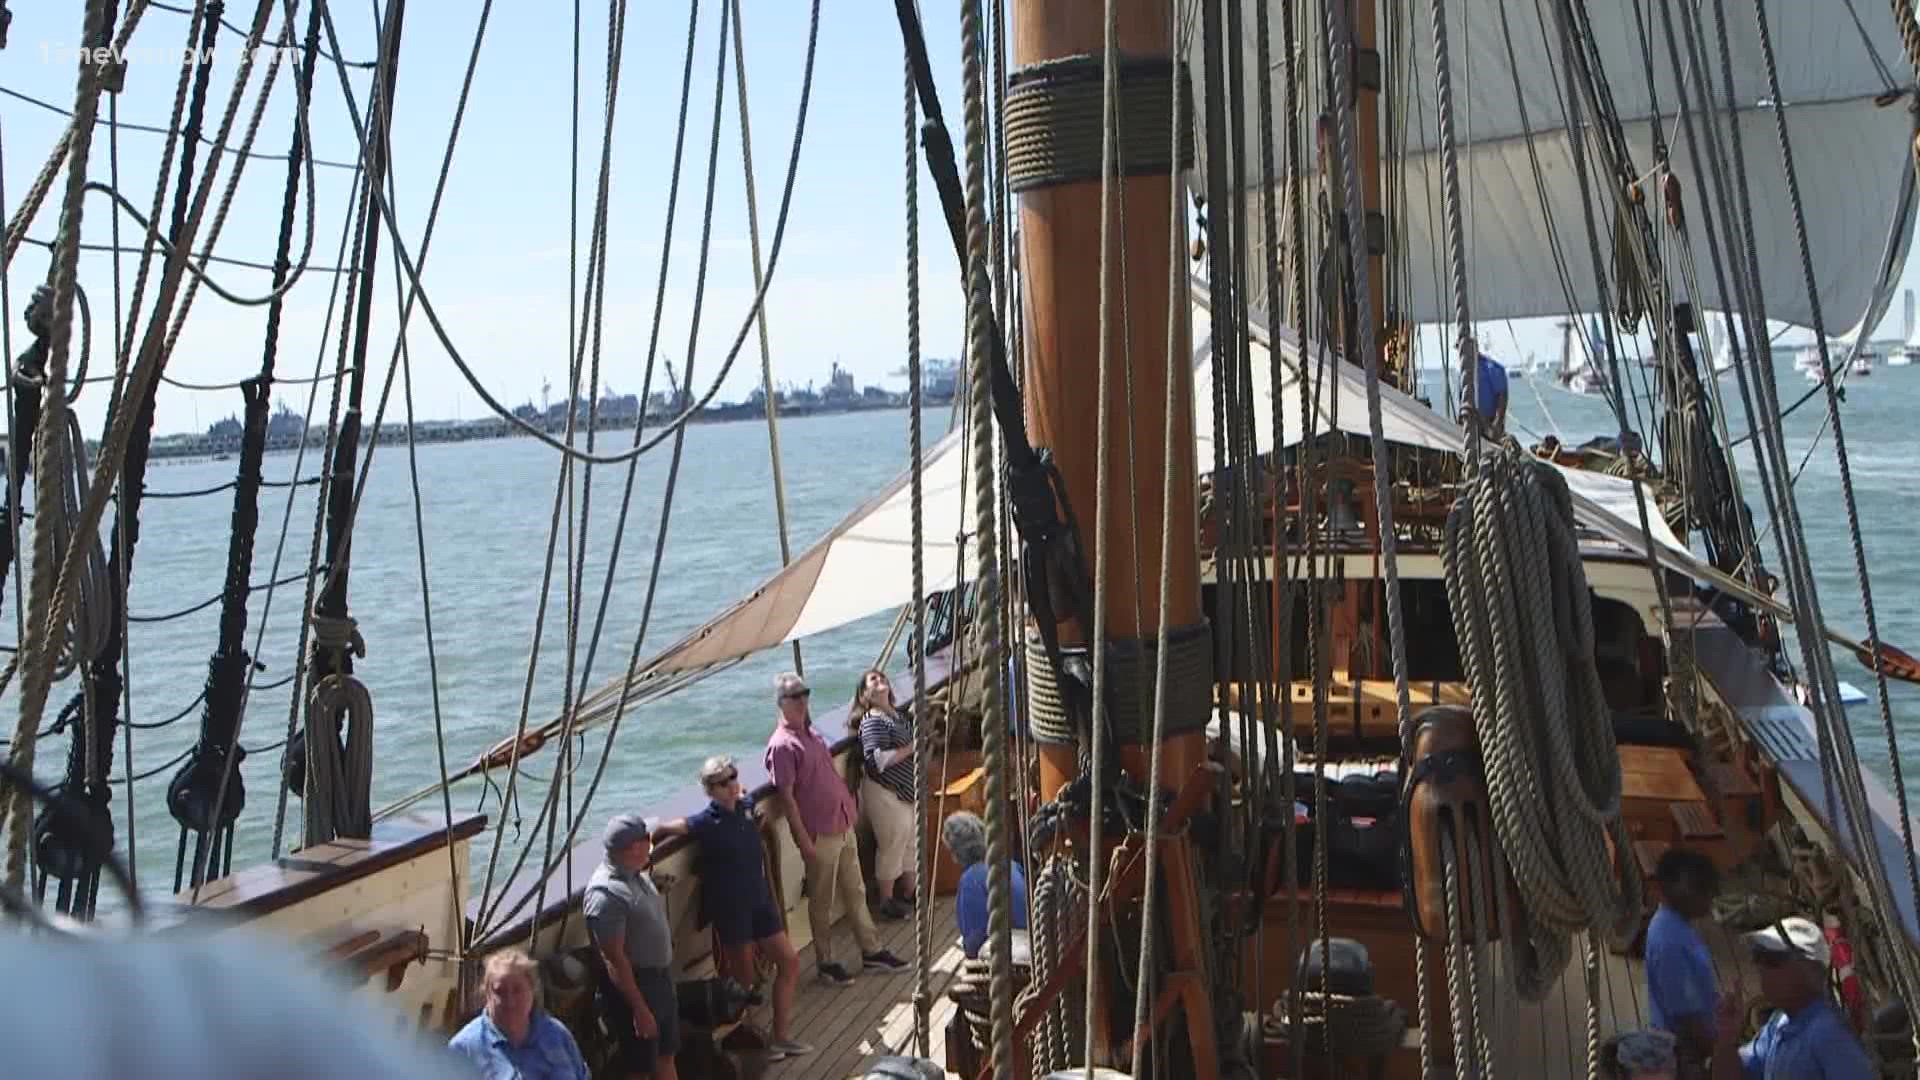 The Swedish warship replica and a number of other historic tall ships were docked along Town Point Park Friday morning during the 2022 Harborfest Parade of Sail.